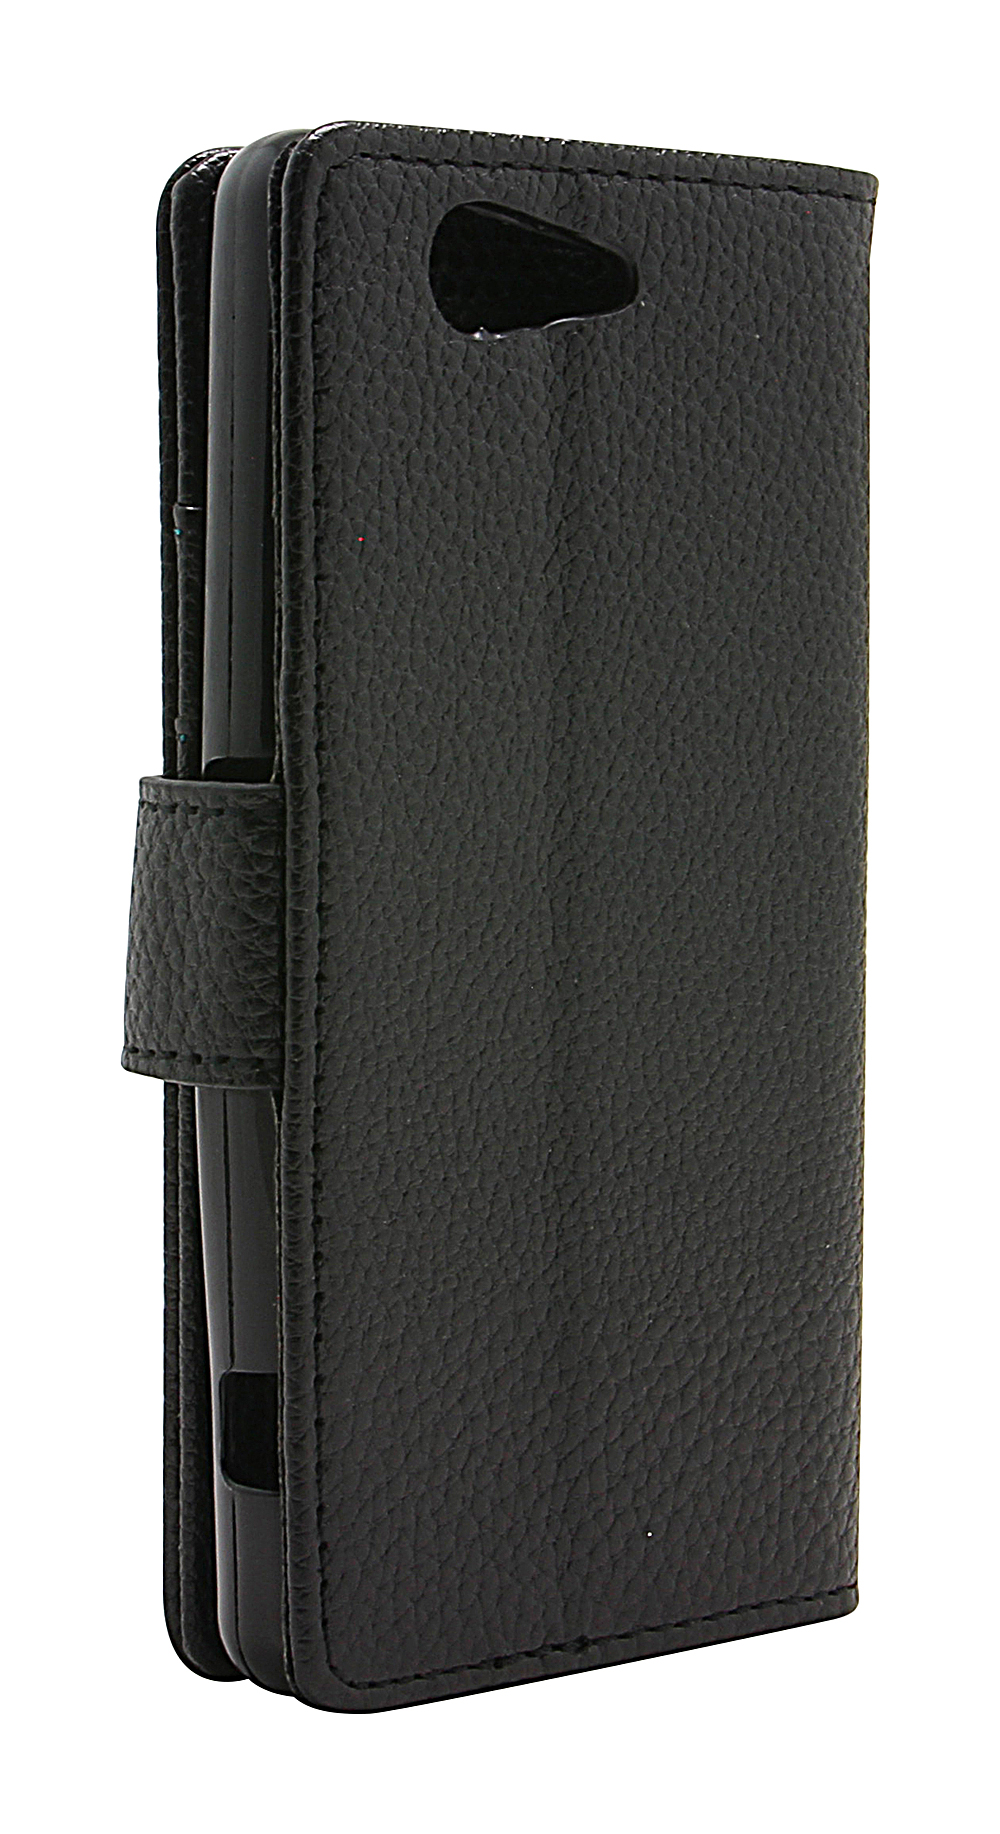 New Standcase Wallet Sony Xperia Z3 Compact (D5803)